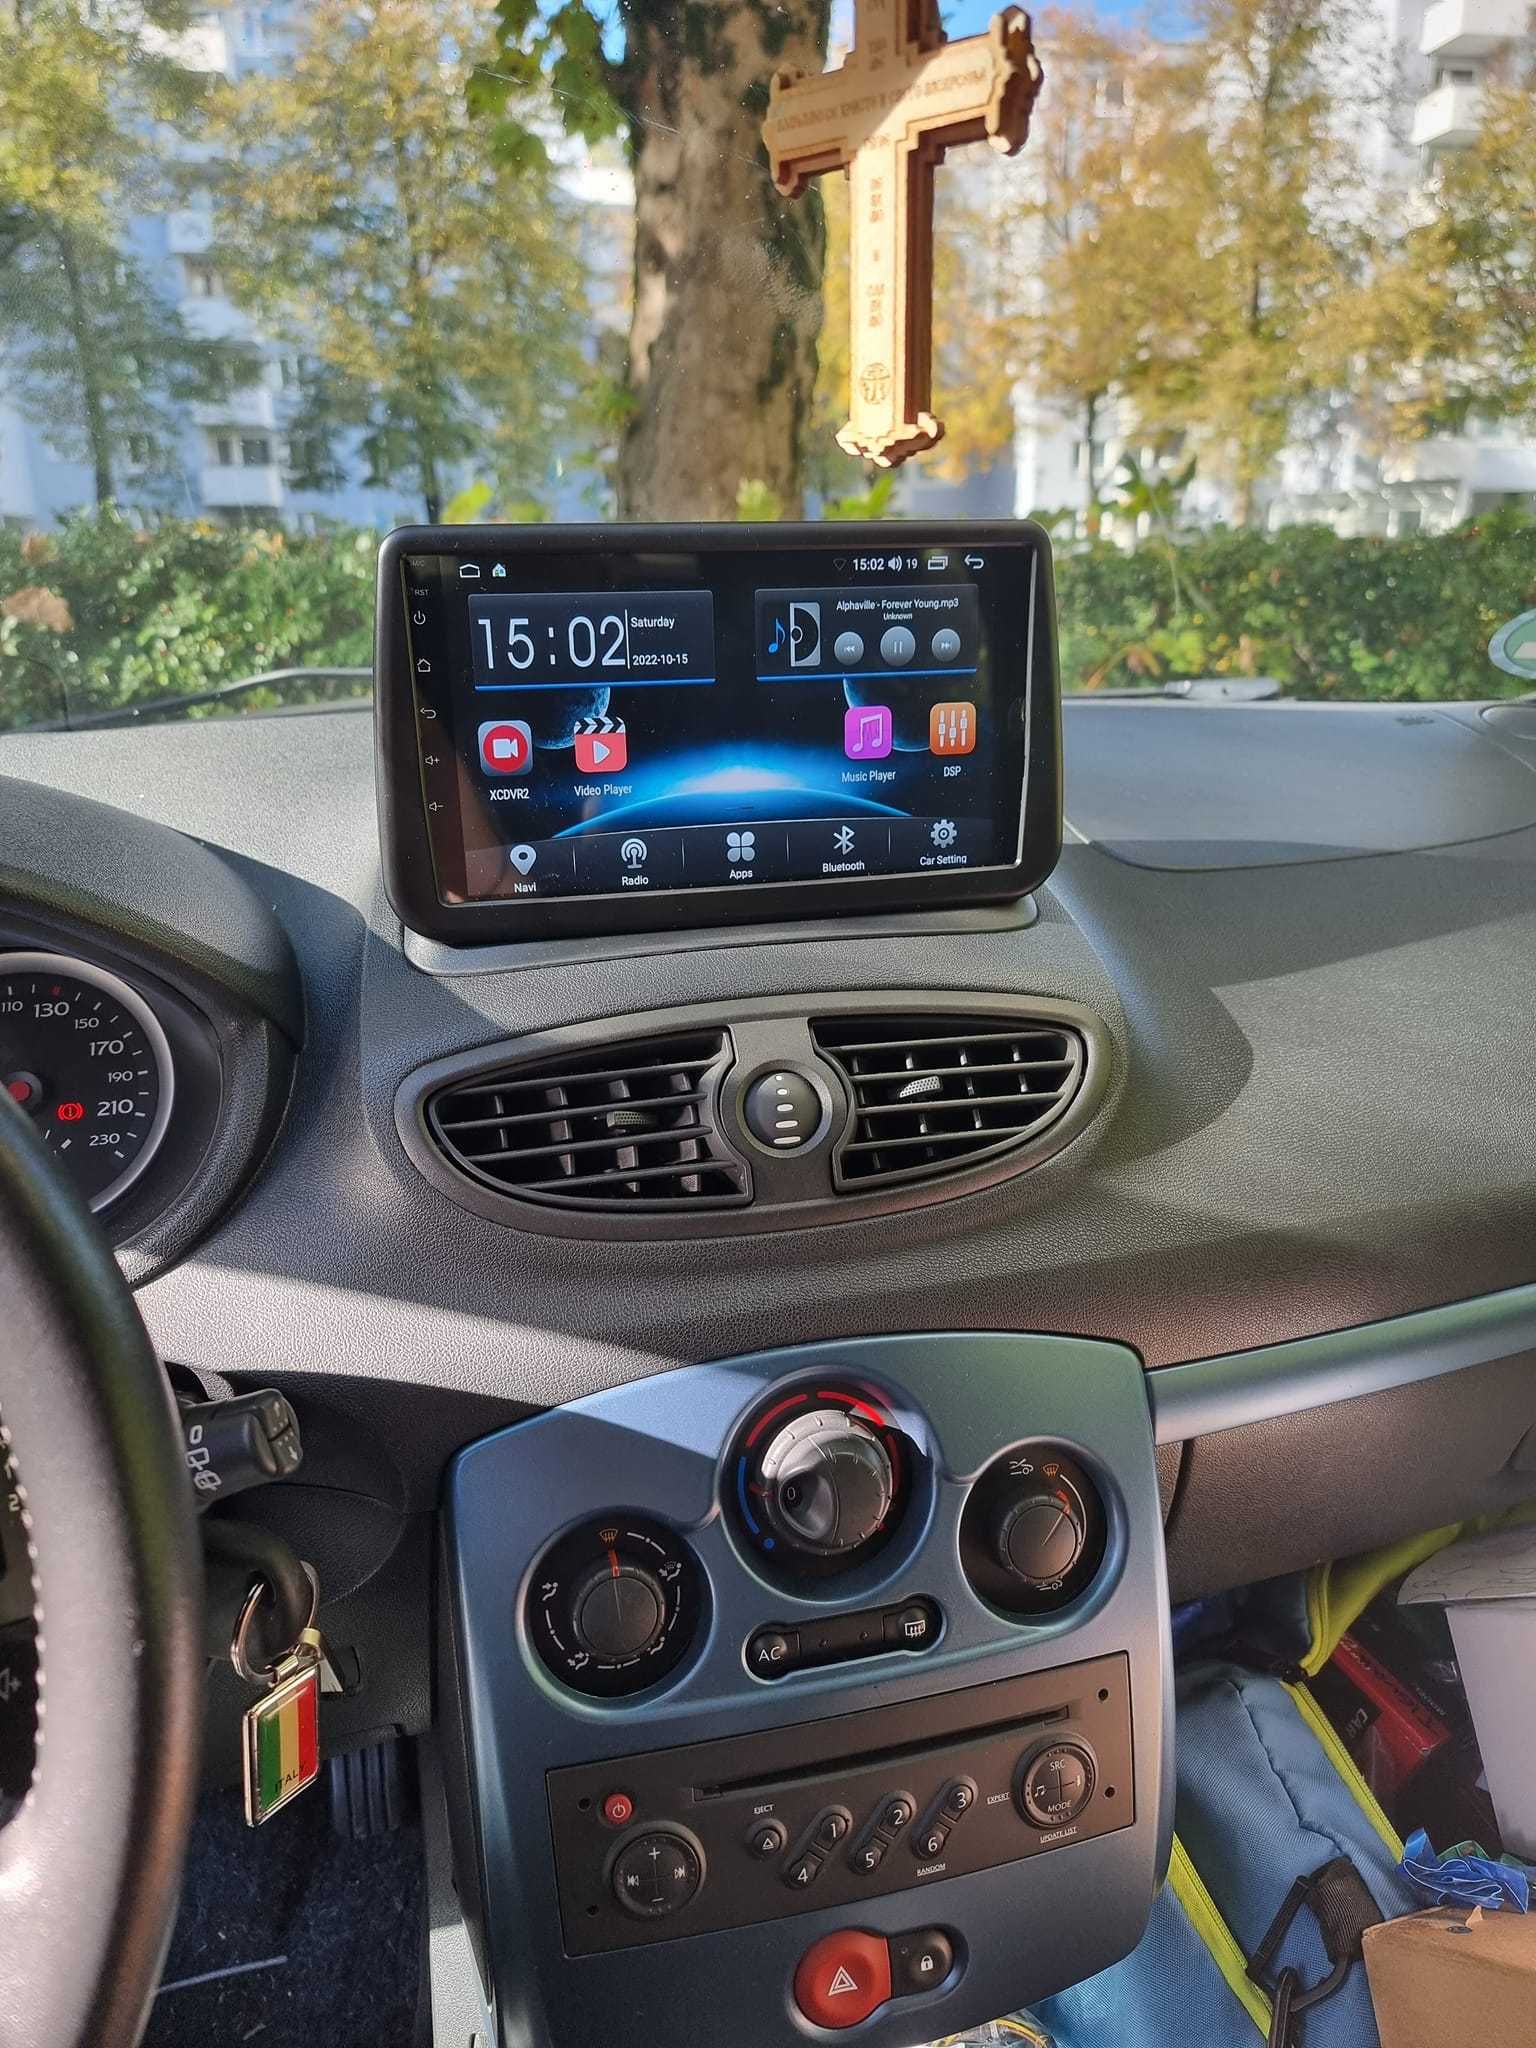 Rádio 2DIN 9"• Renault Clio 3 III • (2005 a 2014) • Android [4+32GB]